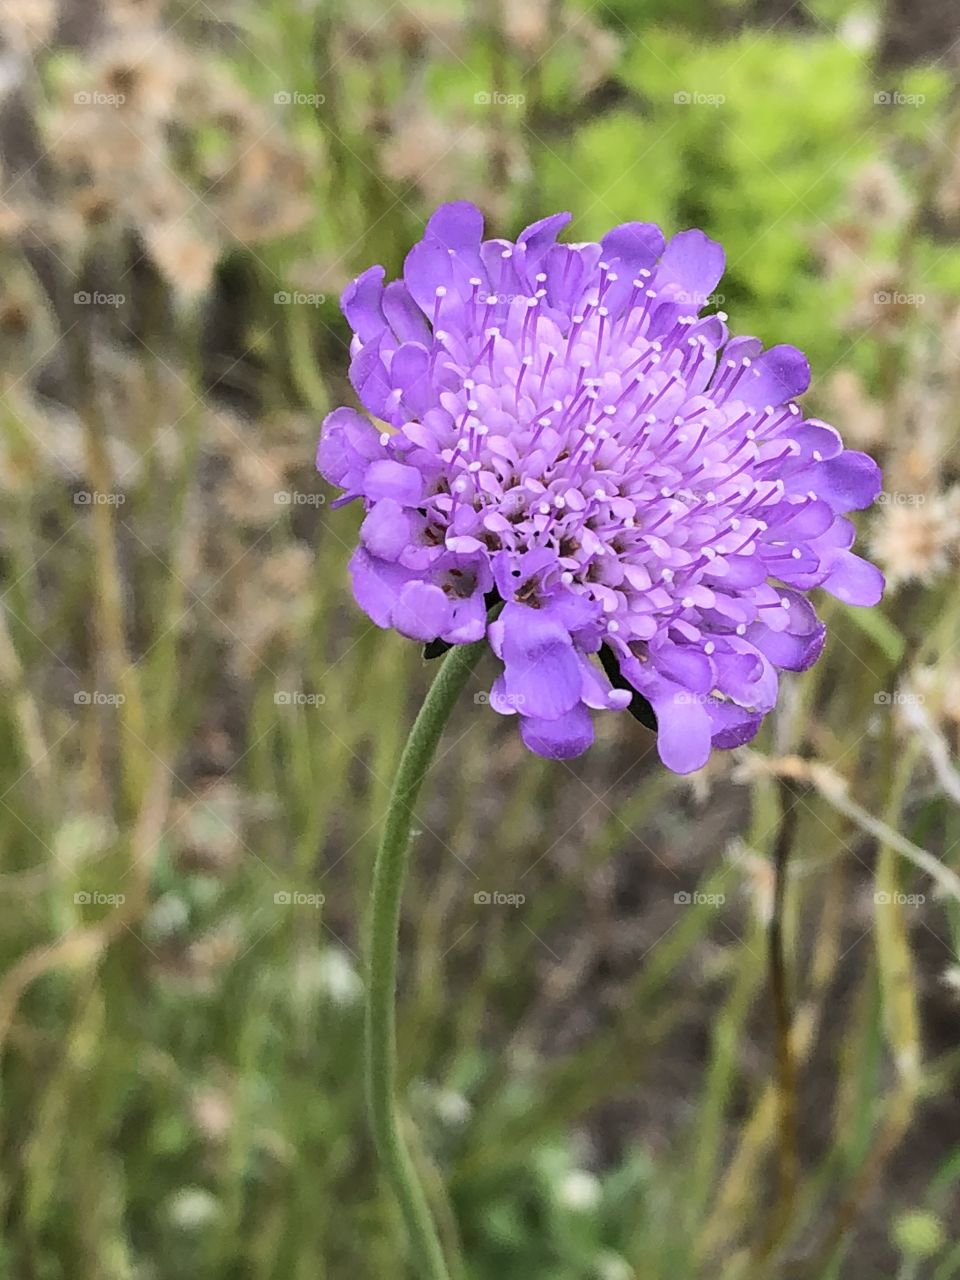 Sometimes I wish I knew more about botany or took better notes when I took a picture of this gorgeous flower. I’d love to be able to identify it for you! 